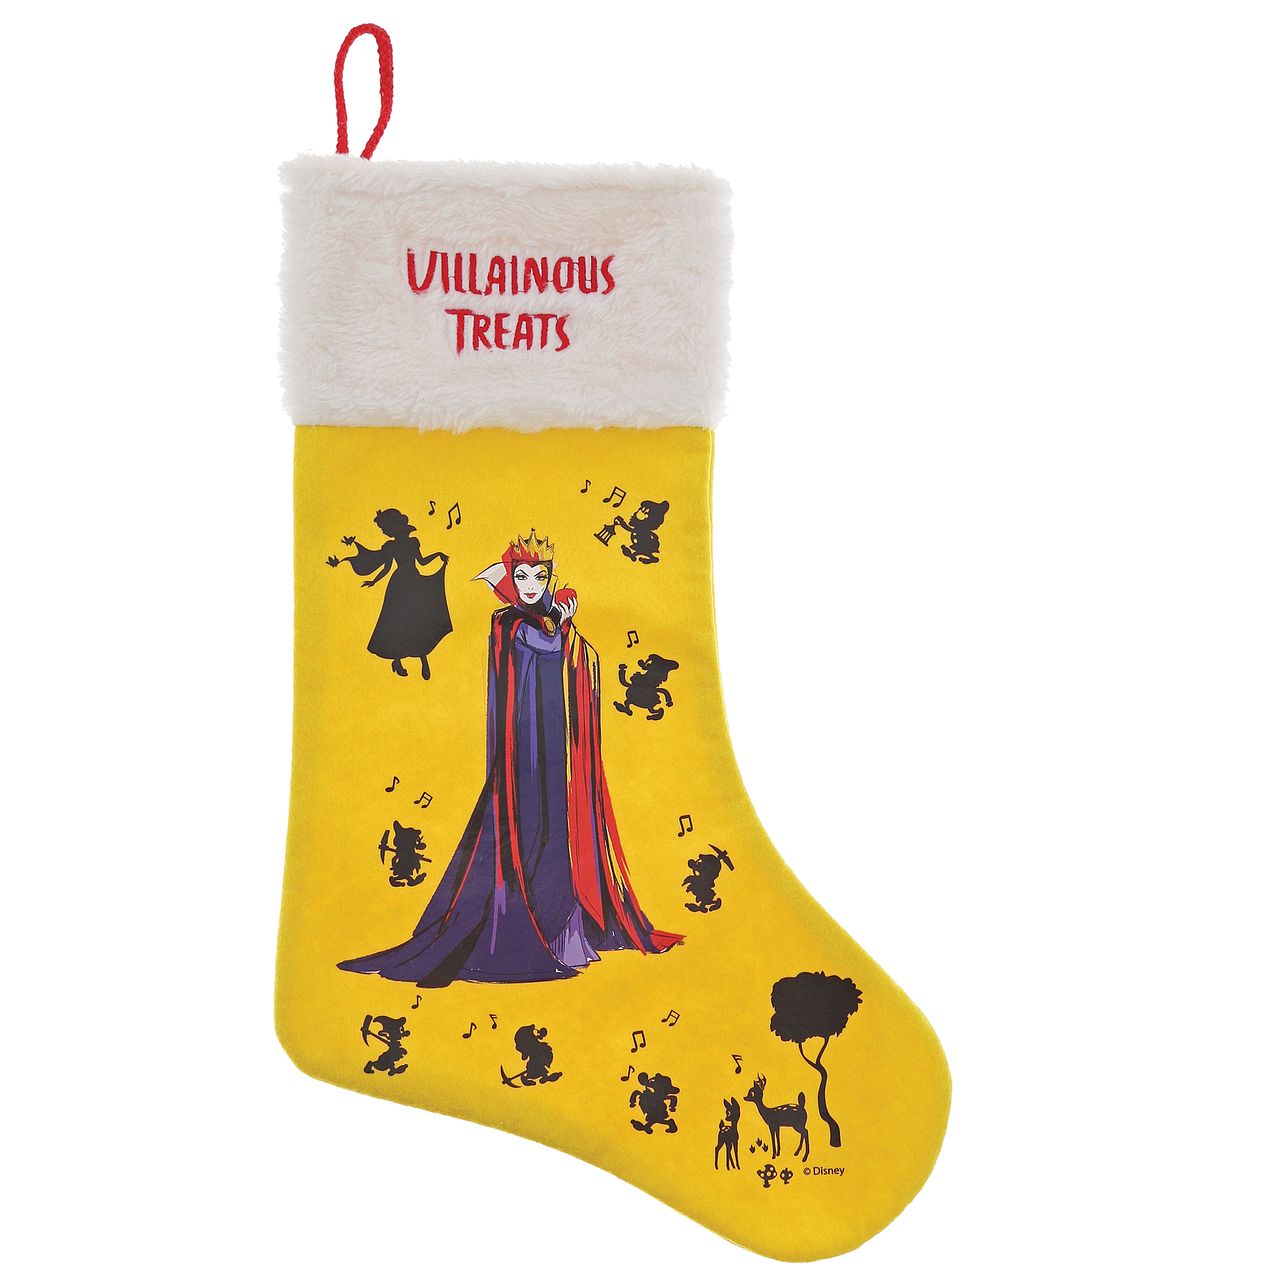 Disney Villainous Treats Evil Queen Christmas Stocking  What villainous treats will you find hiding in this Evil Queen stocking? Presented with a giftable hangtag this wicked, Snow White and the Seven Dwarfs stocking creates a unique Christmas gift, which can be enjoyed year after year.